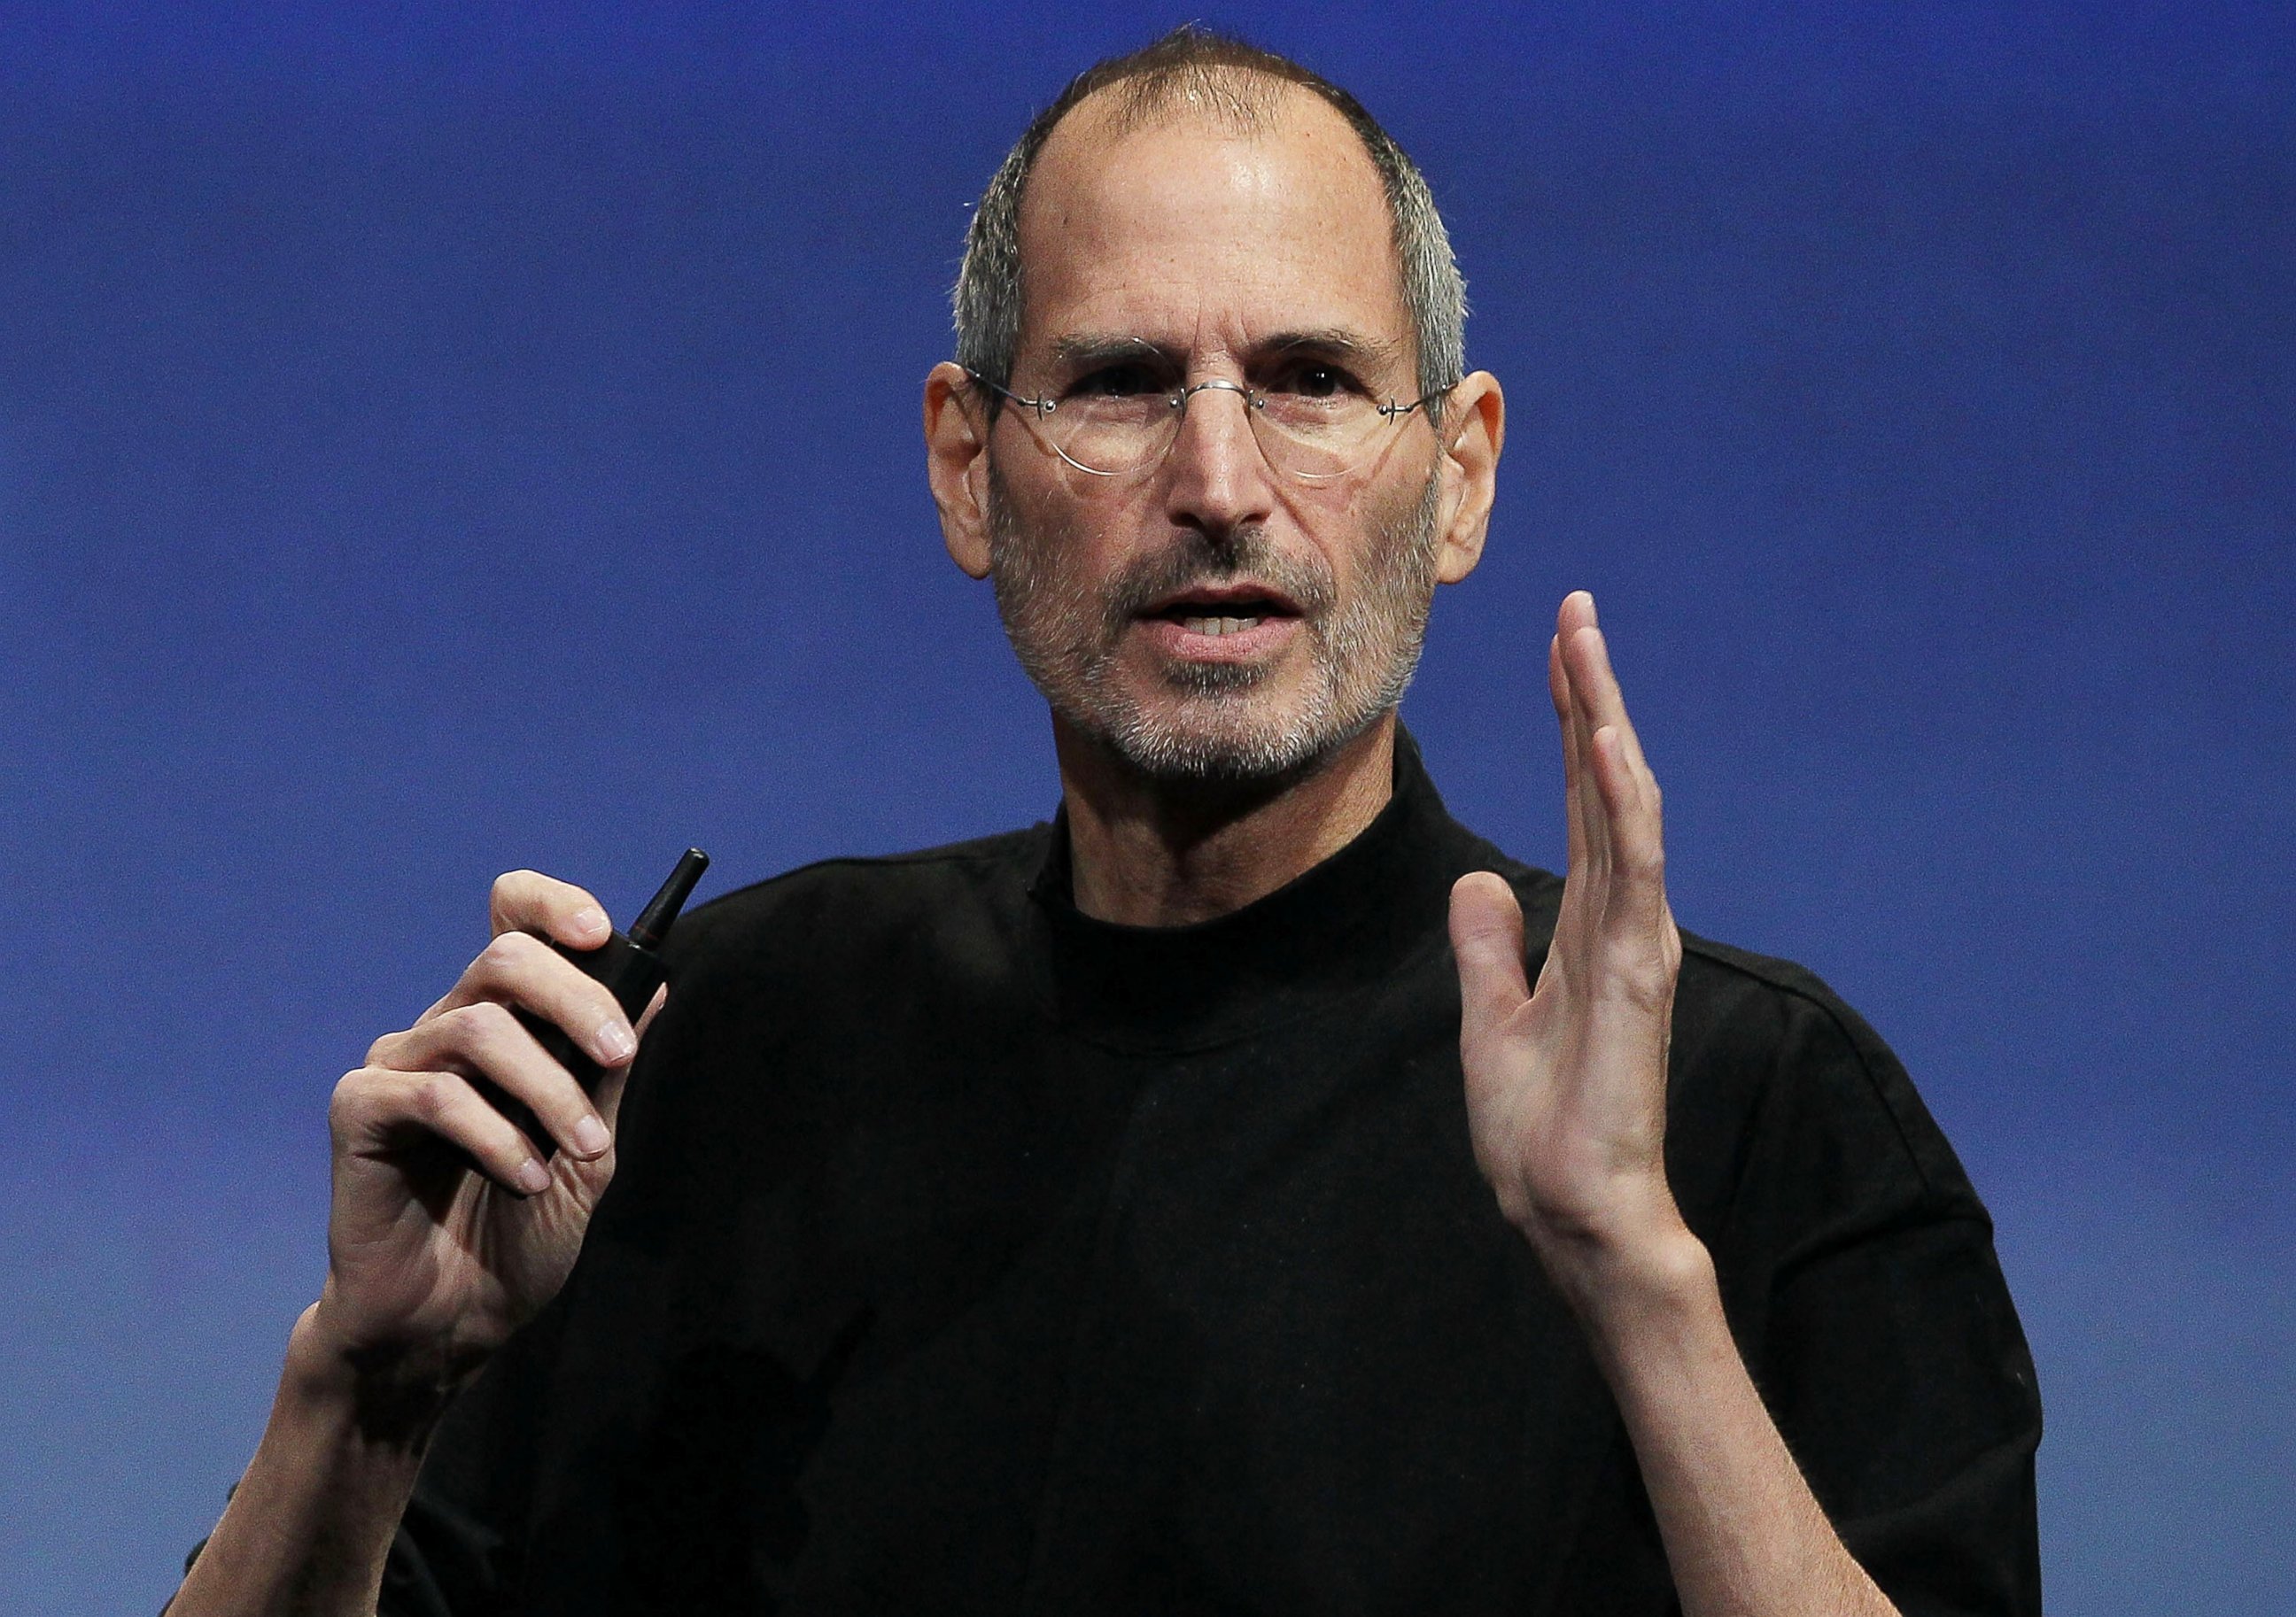 PHOTO: Apple CEO Steve Jobs speaks during an Apple special event in Cupertino, Calif., in this April 8, 2010 file photo.